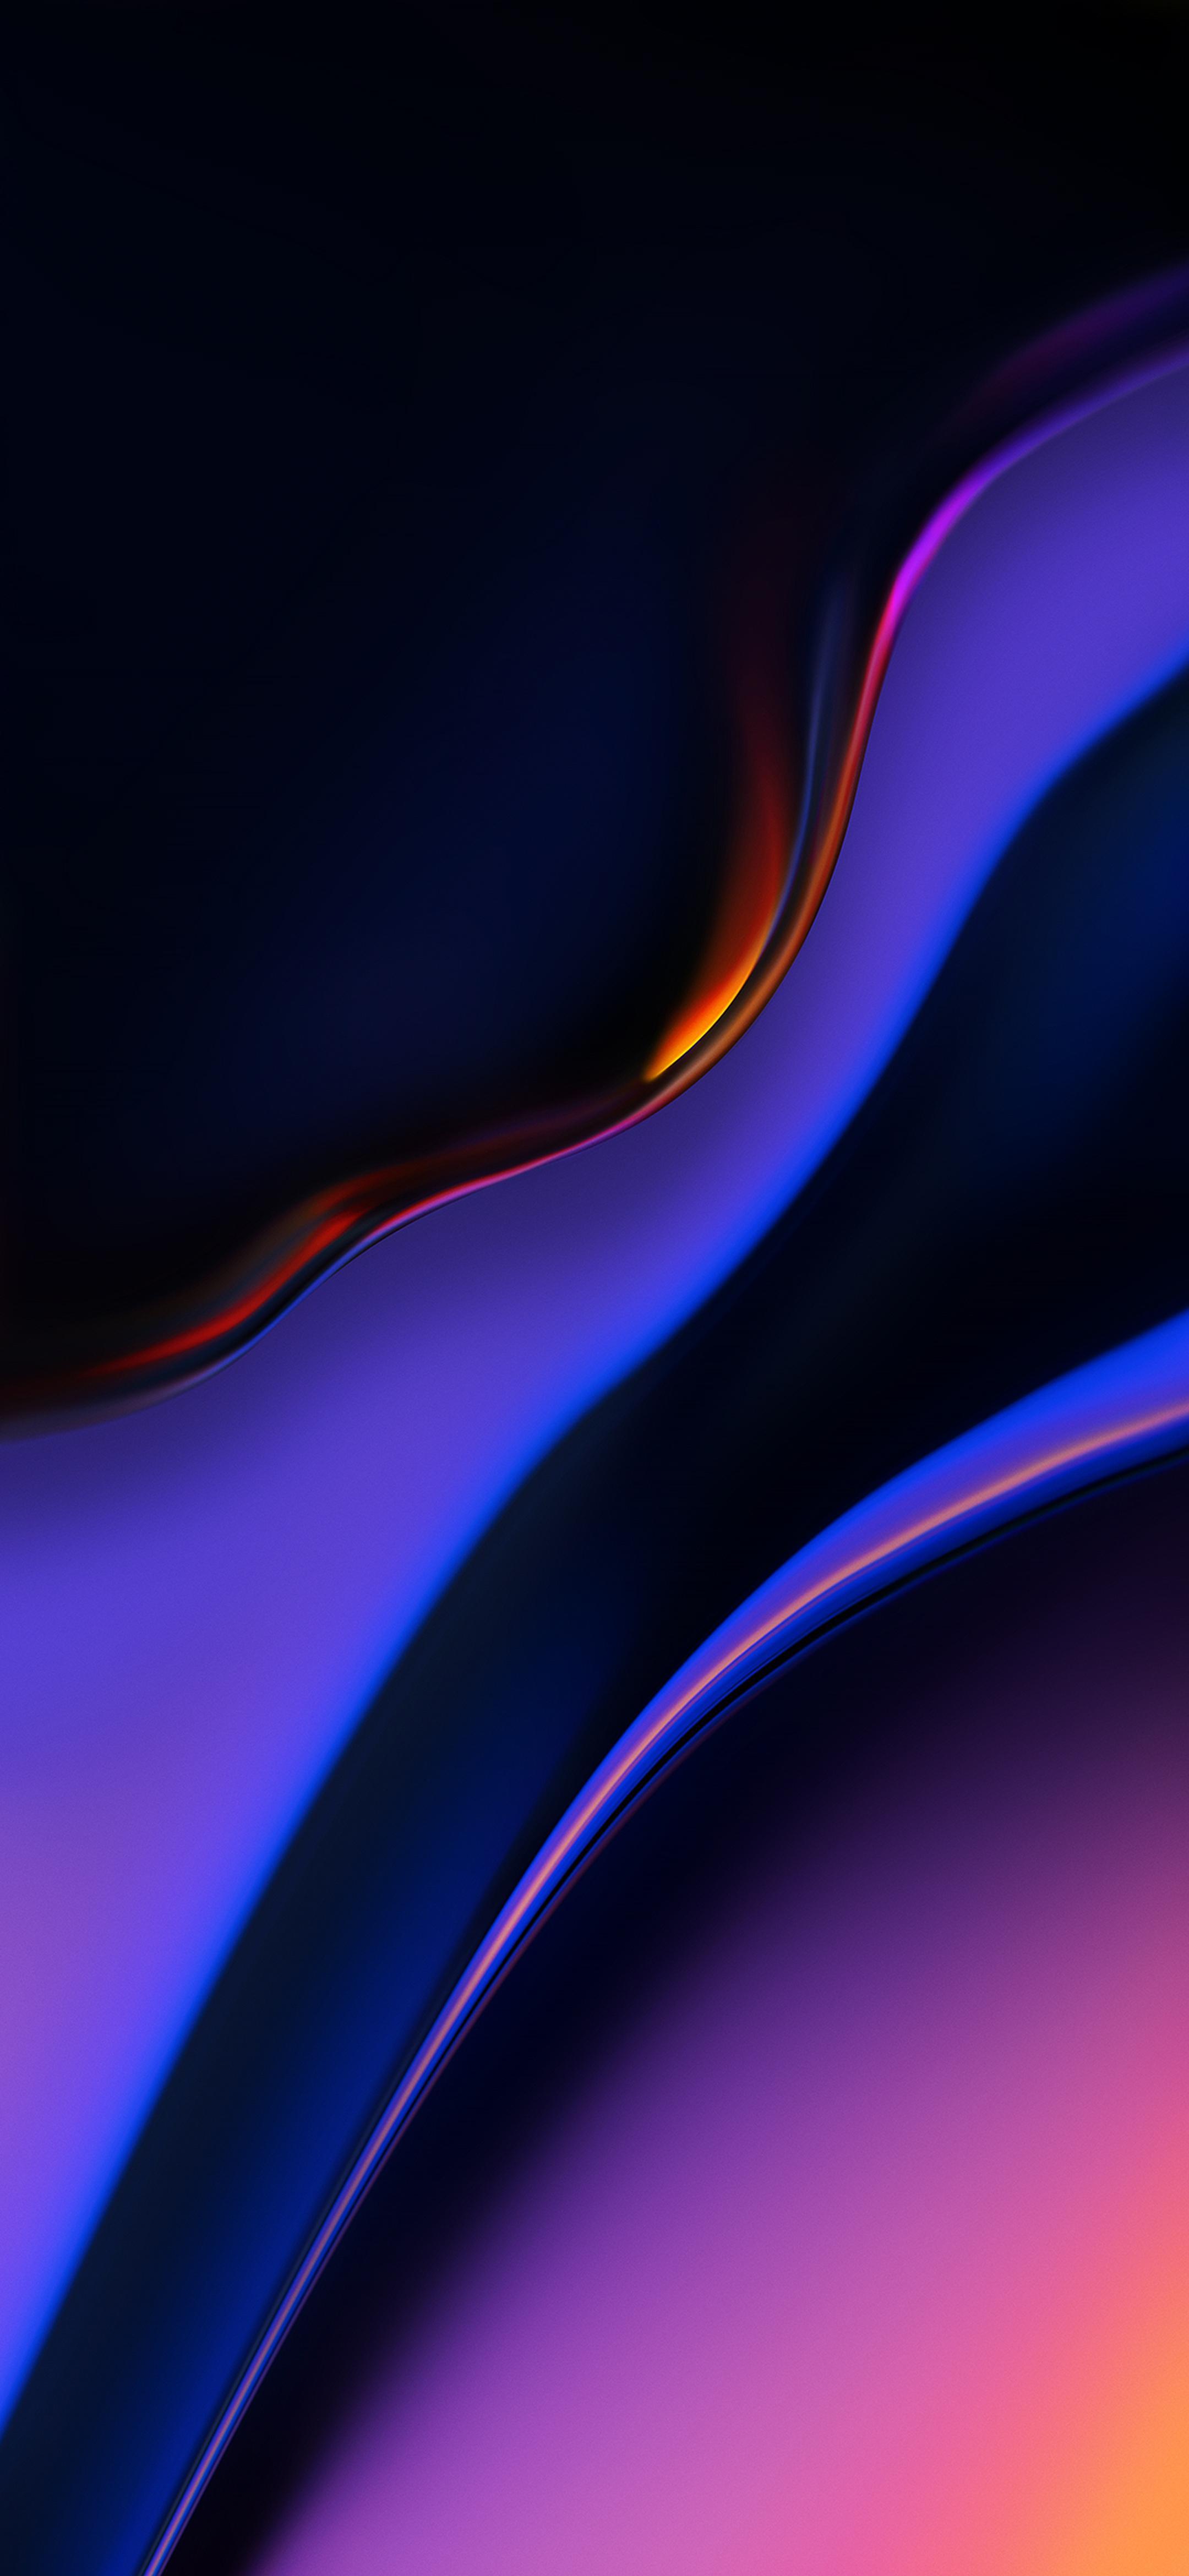 Amoled Wallpaper 4K : 60 QHD and HD Wallpapers perfect for ...